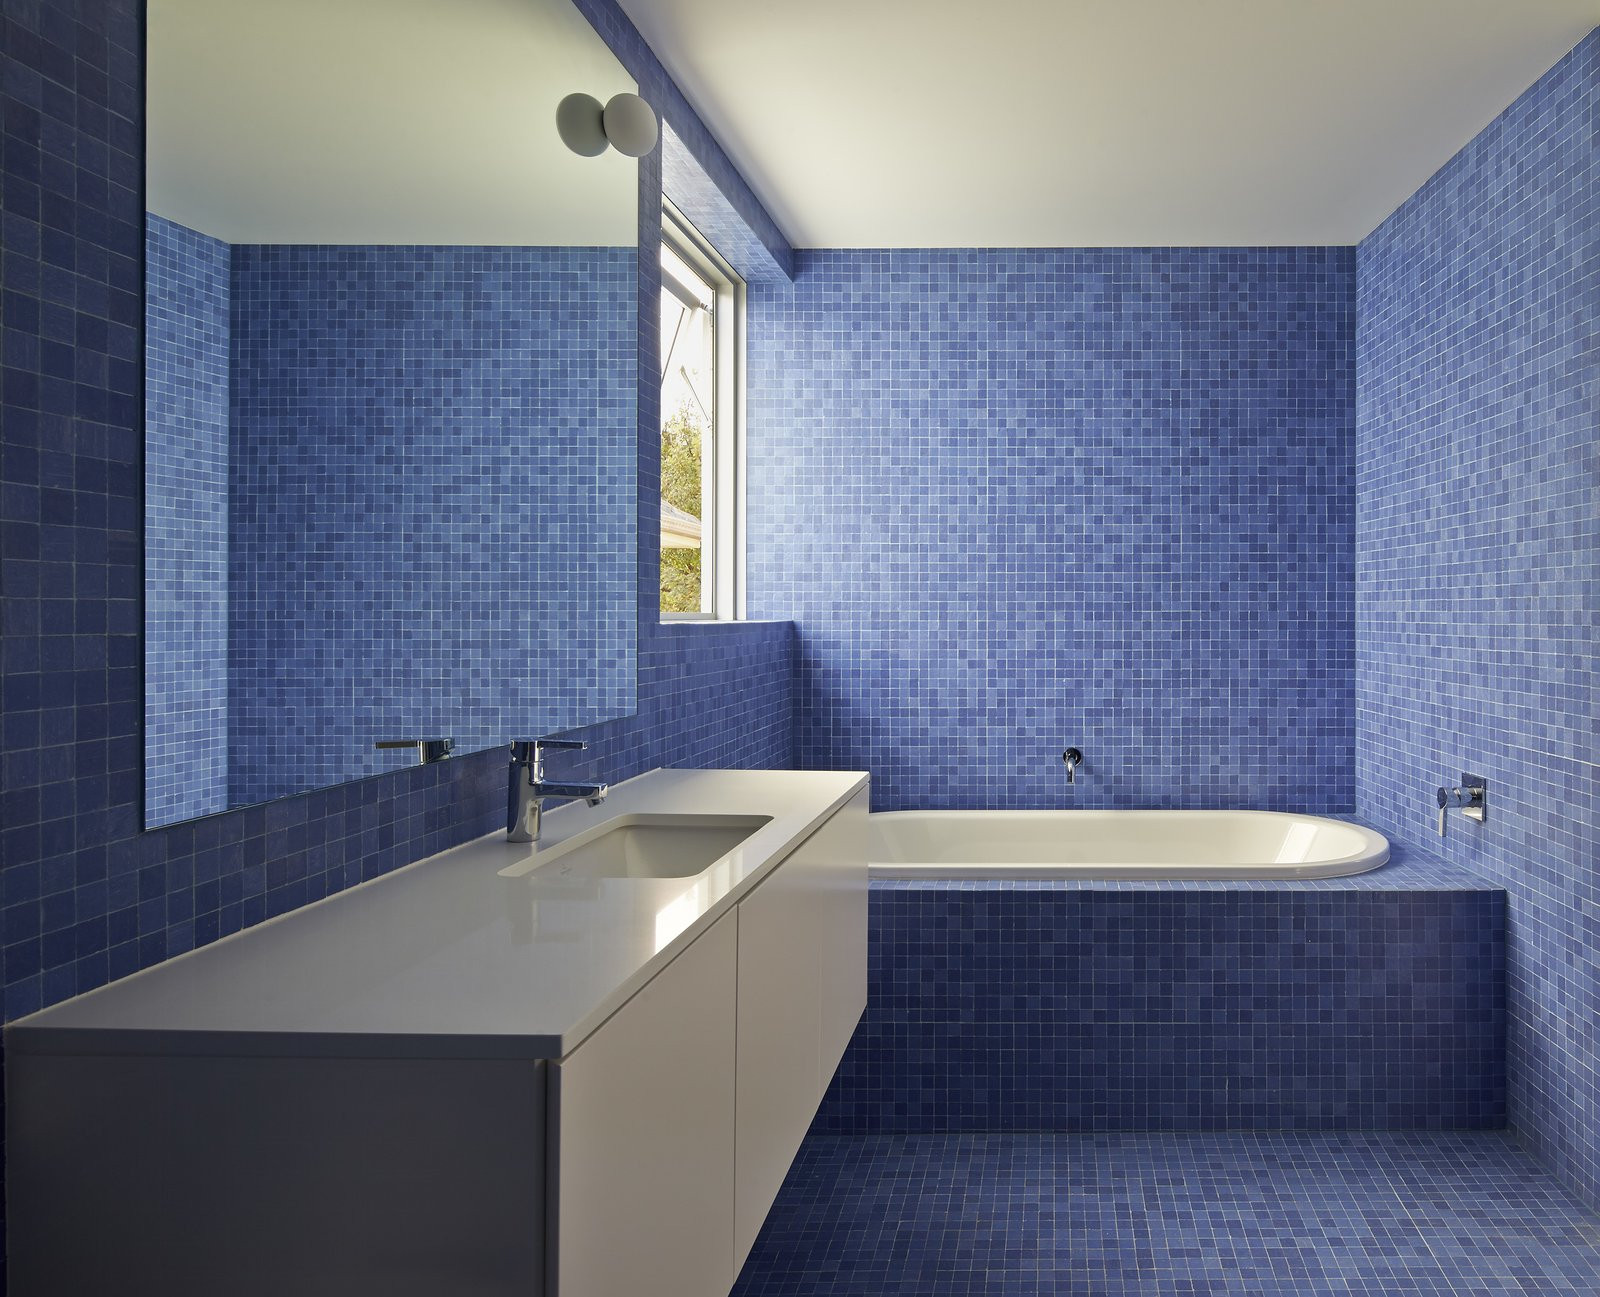 Bathroom Tiles Design Images
 7 Essential Tips For Choosing the Perfect Bathroom Tile